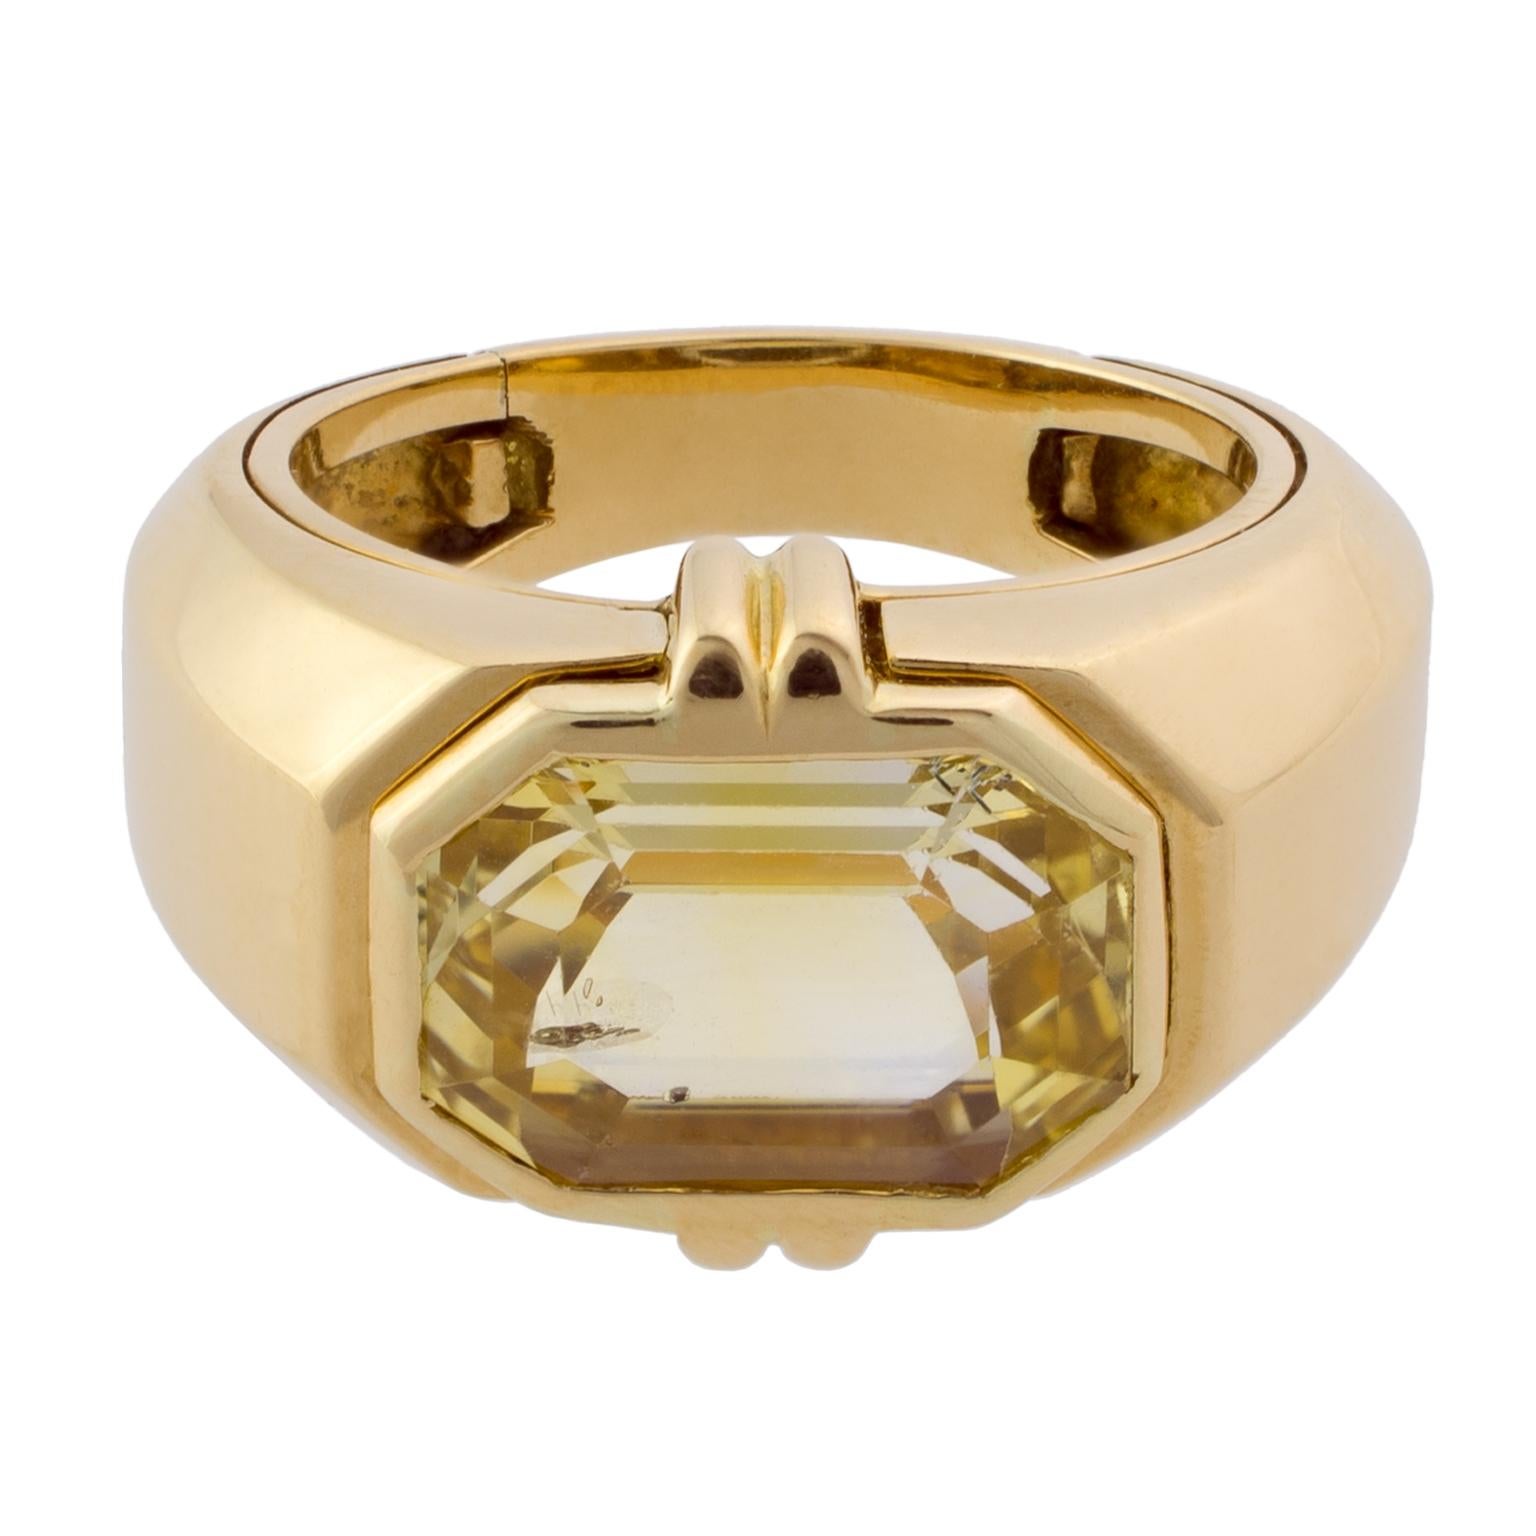 Verney ring in gold centered by an octogonal yellow sapphire with an approximate weight of 5.57 carats.
Size: Swiss 13, French 53, US 6 1/2